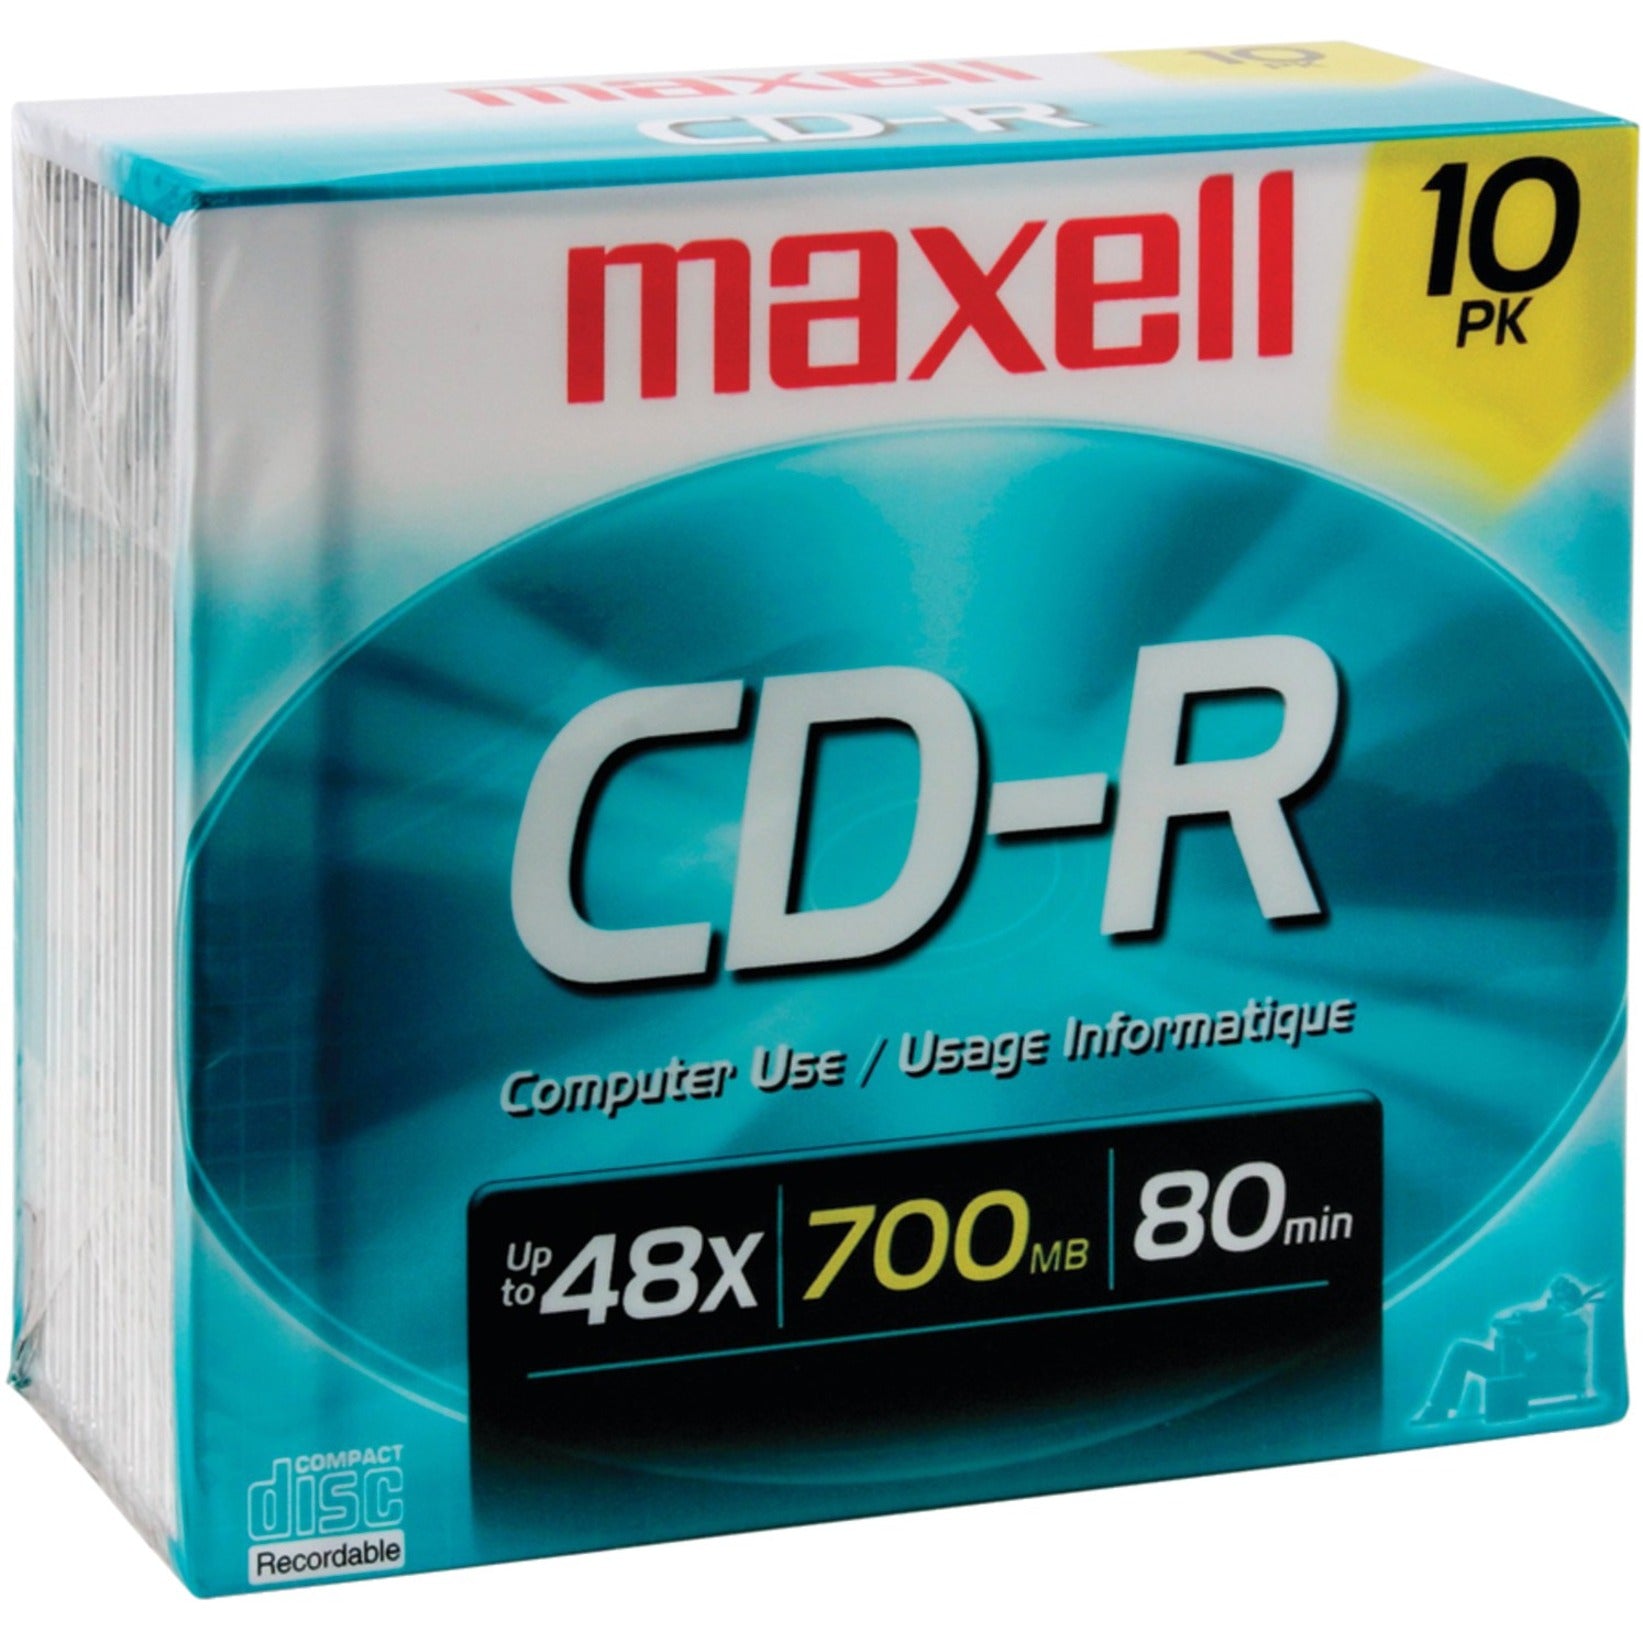 Maxell 622860/648210 40x CD-R Media, 700MB Storage Capacity, 1.33 Hour Recording Time